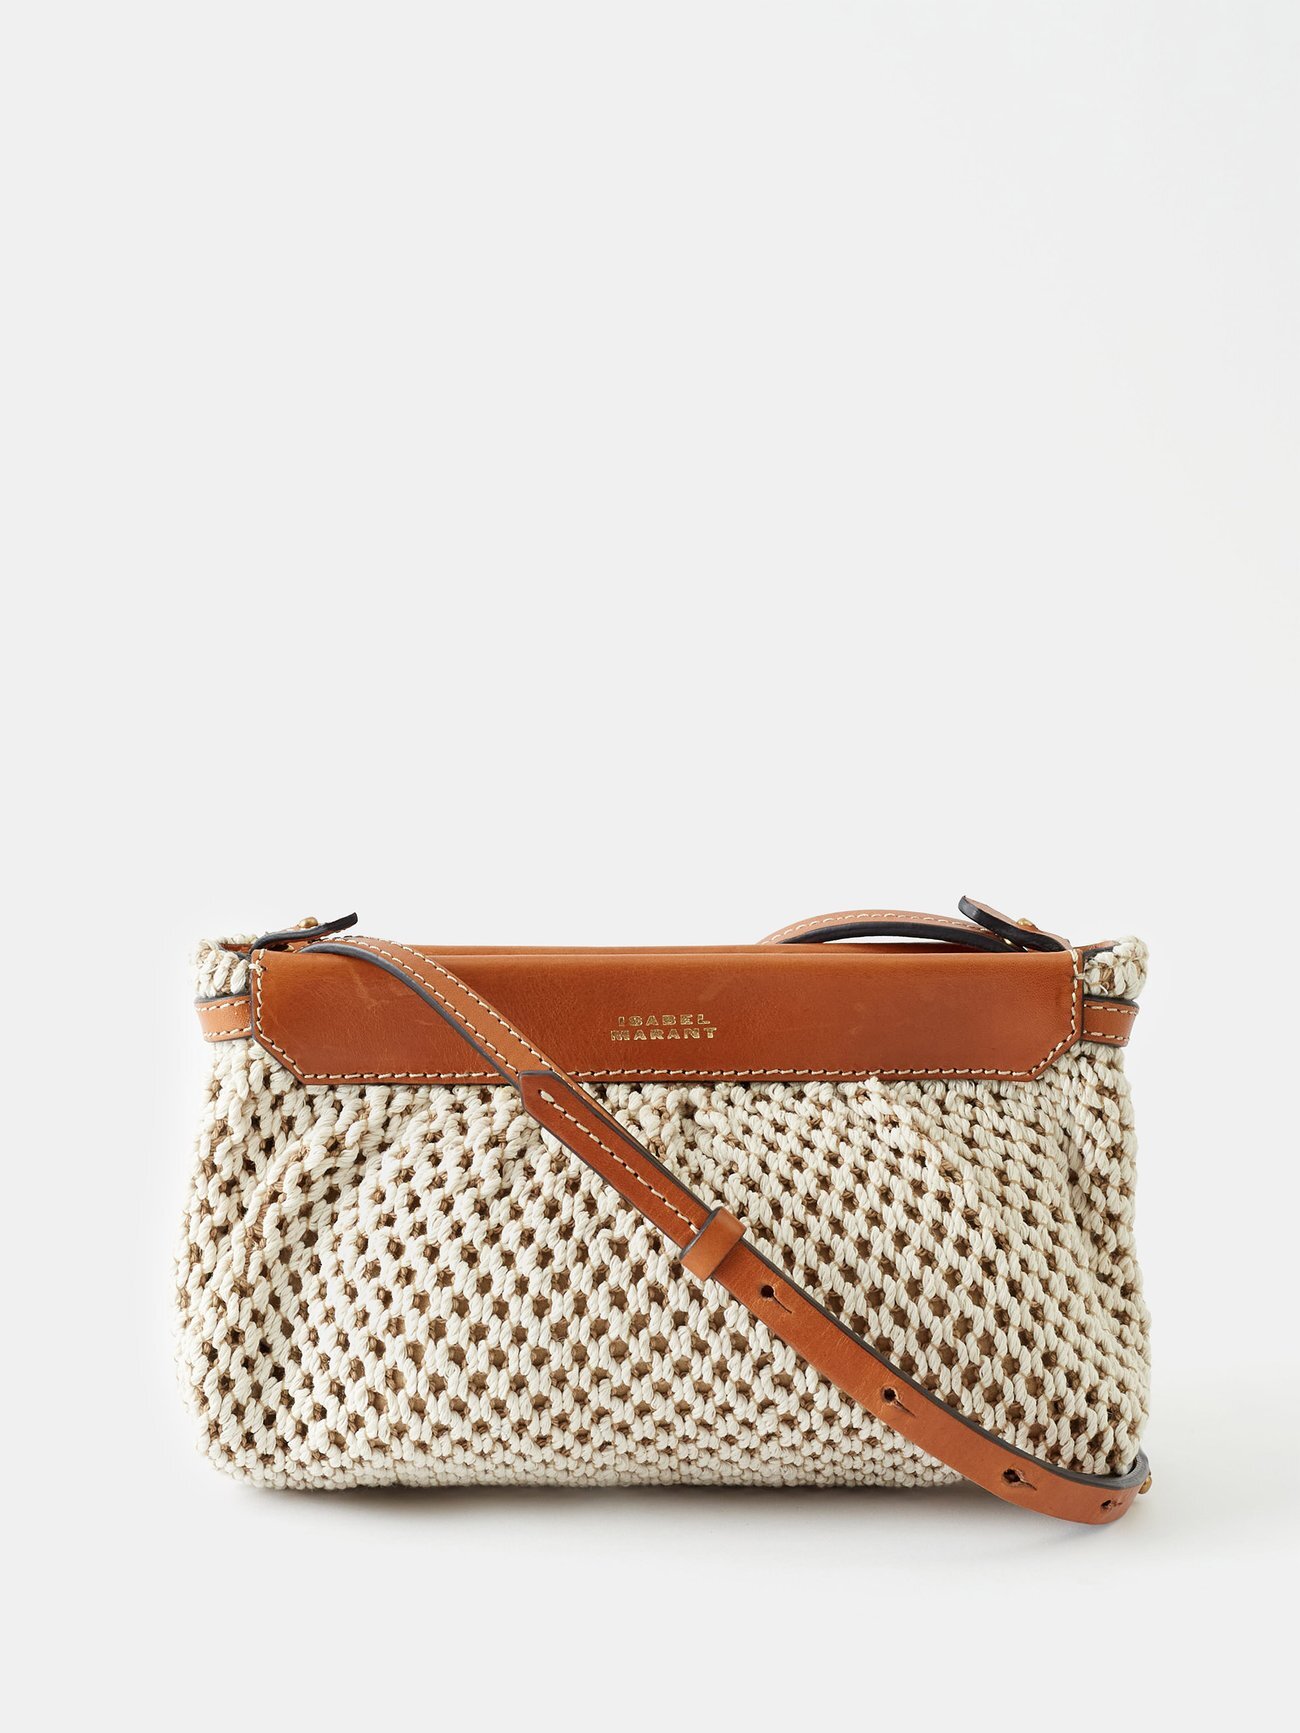 Isabel Marant - Luz Small Leather-trim Crocheted Clutch Bag - Womens - Tan White